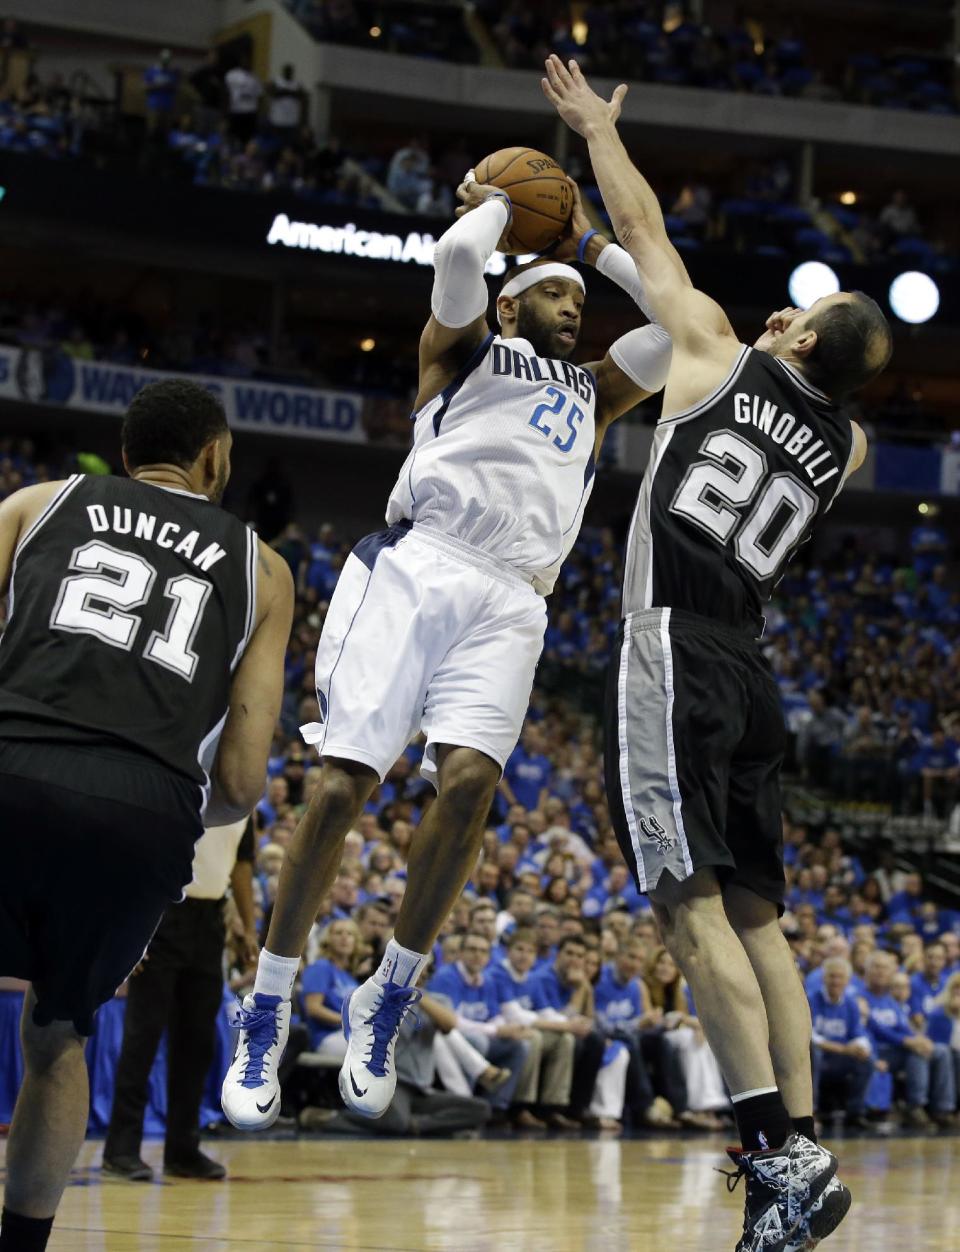 San Antonio Spurs' Tim Duncan (21) watches as Dallas Mavericks' Vince Carter (25) passes the ball under pressure from Spurs' Manu Ginobili (20), of Argentina, in the first half of Game 6 of an NBA basketball first-round playoff series on Friday, May 2, 2014, in Dallas. (AP Photo/Tony Gutierrez)